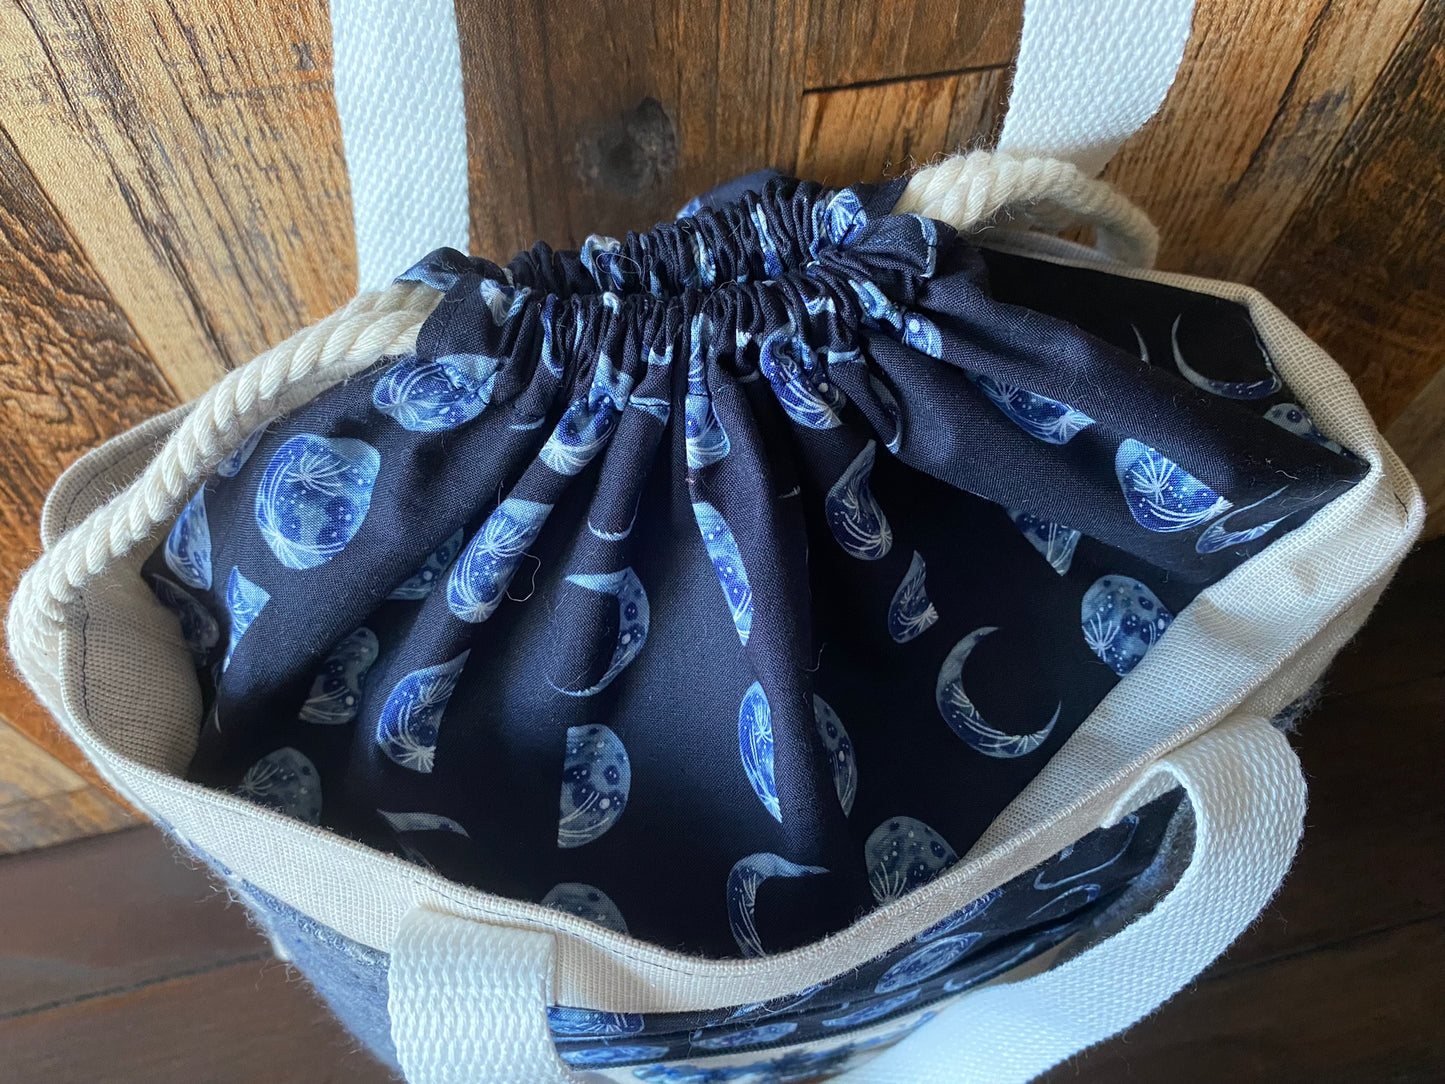 Lunar Phases Medium Firefly Project Bag